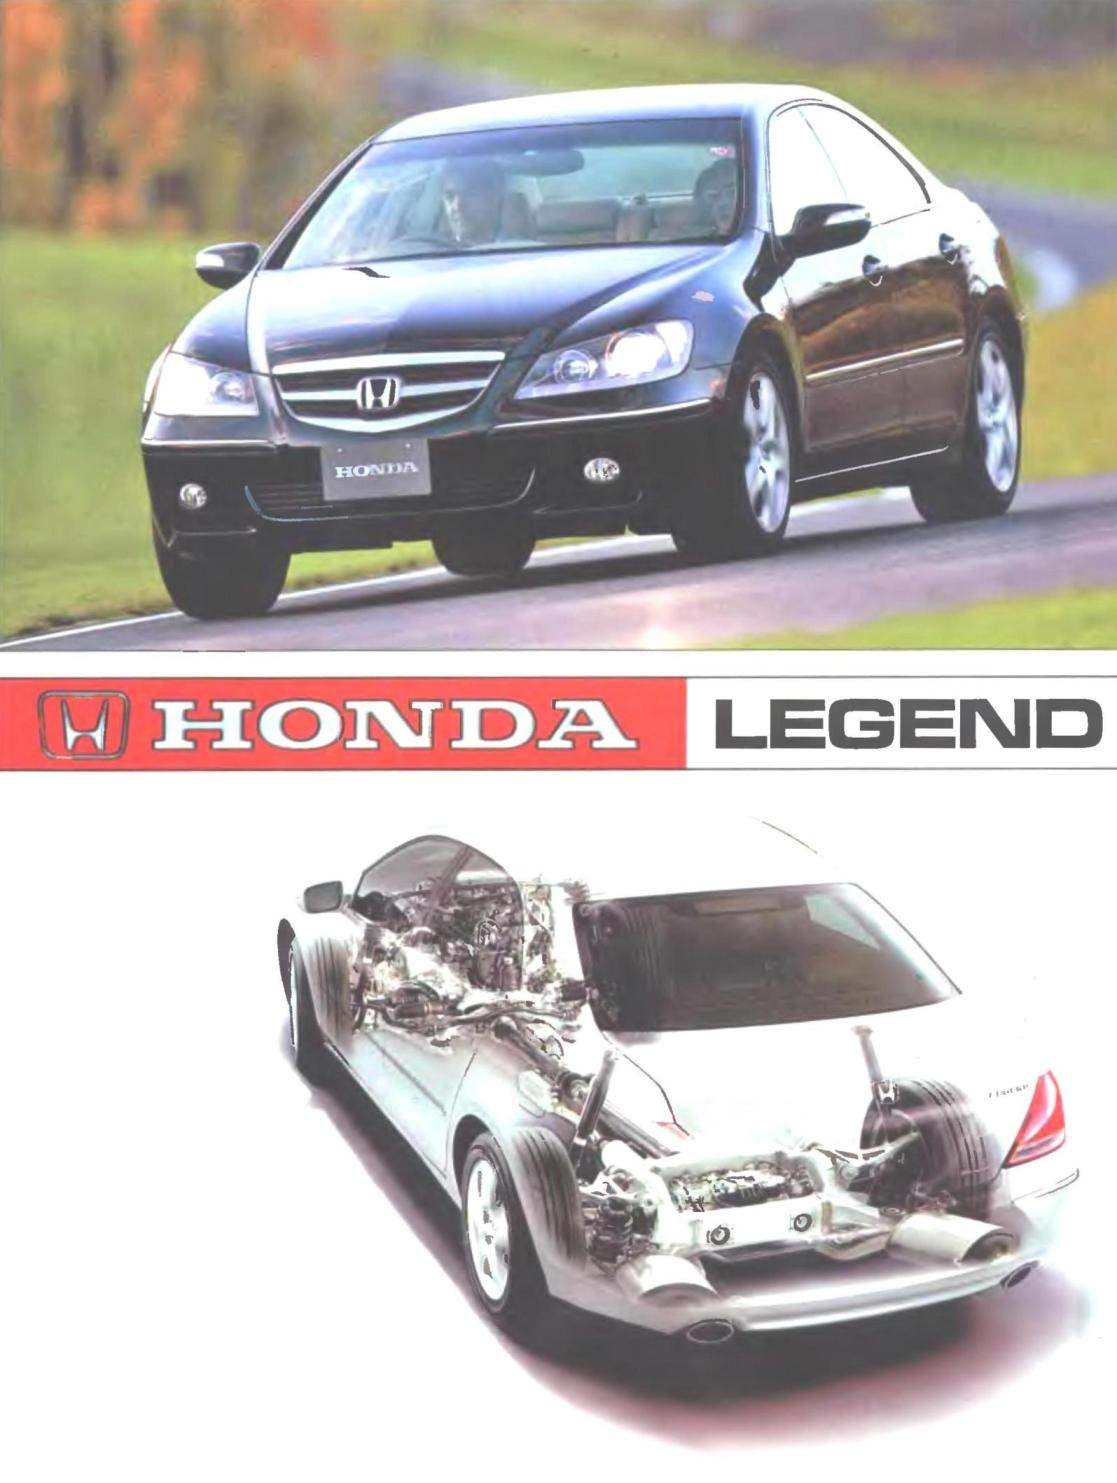 Executive-wheel drive Honda Legend edition 2005 is created using the most modern automotive technologies. The machine is equipped with dozens of devices that help the driver, protecting him and giving him and the passengers comfortable.